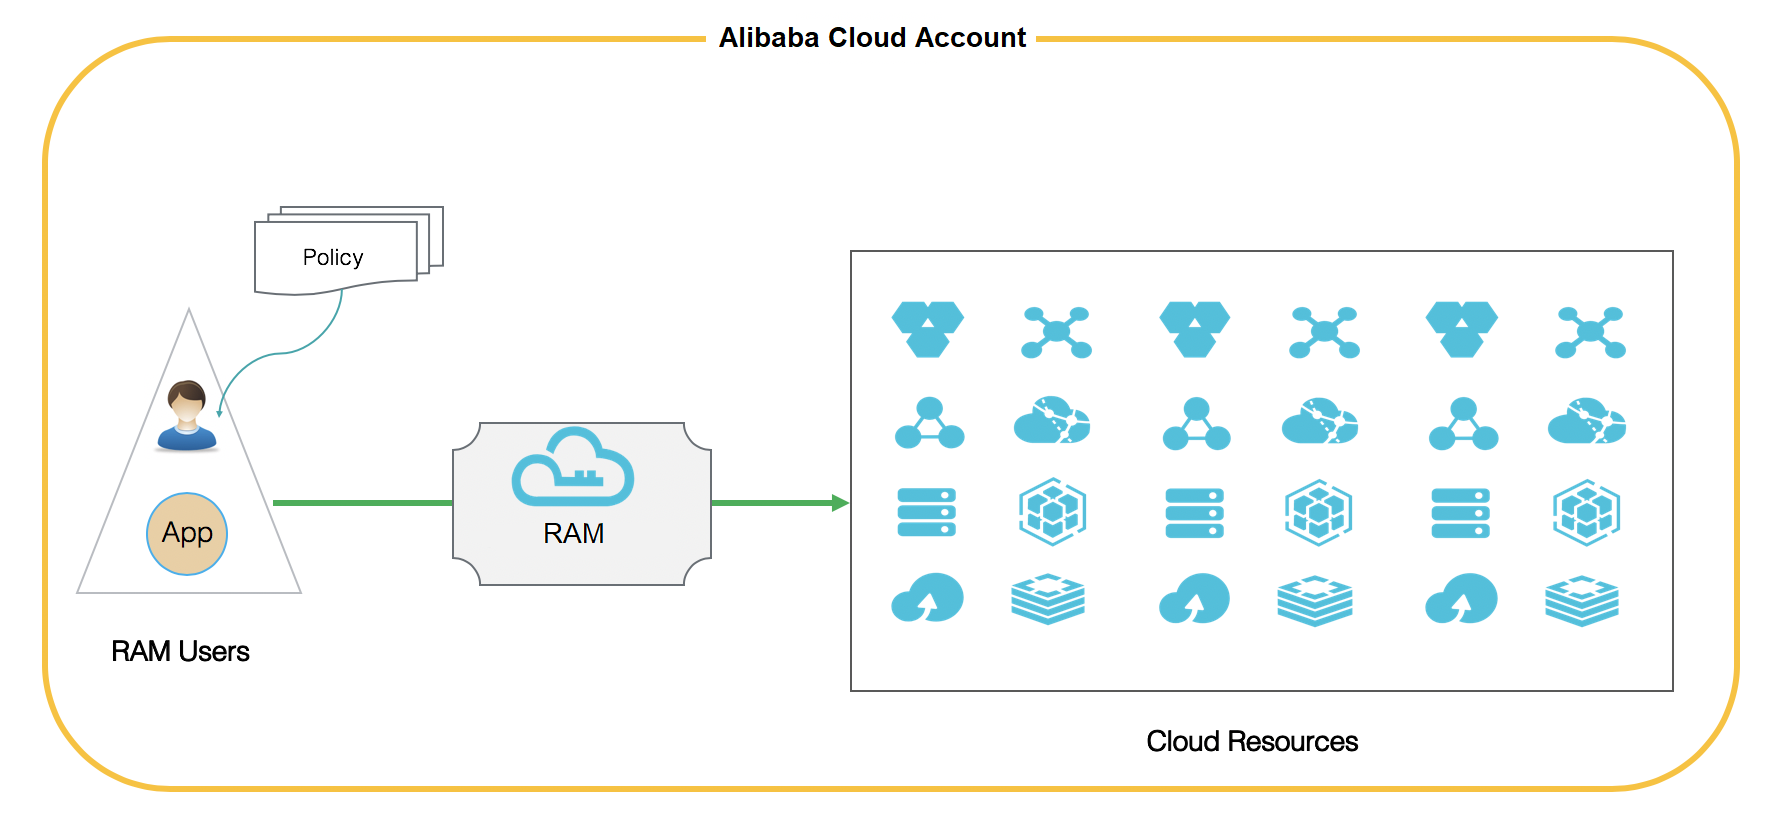 Manage the resources of an Alibaba Cloud account